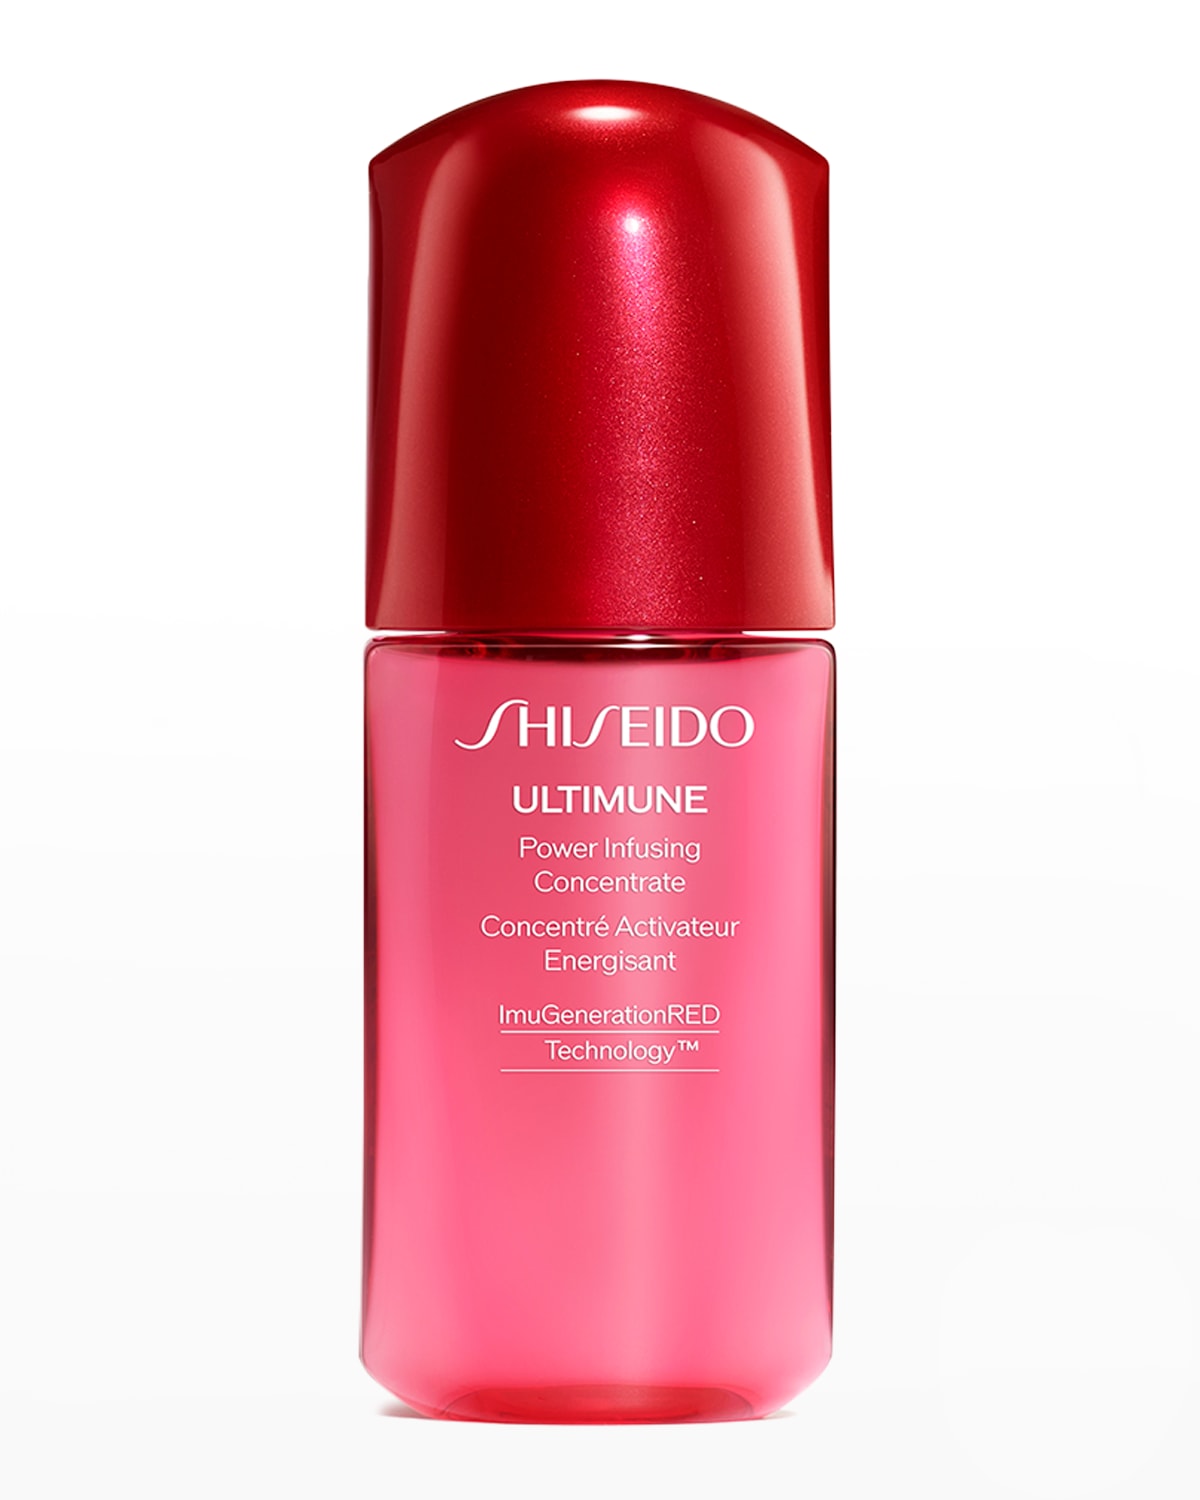 0.33 oz. Ultimune Power Infusing Concentrate, Yours with any $85 Shiseido Purchase